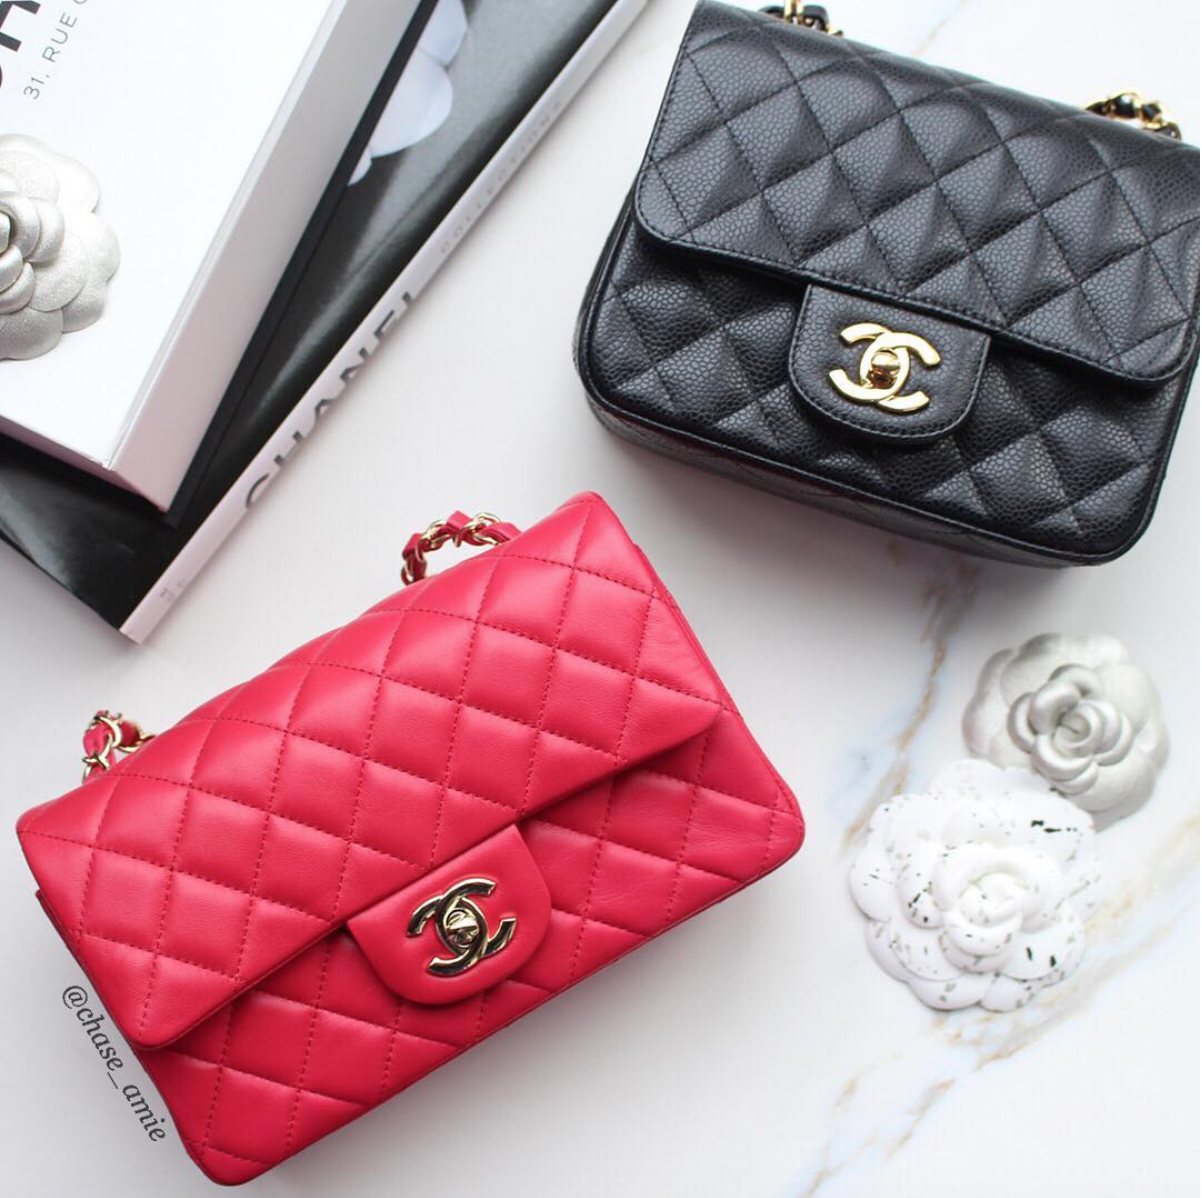 How to Tell If A Vintage Chanel Handbag is Real | Vetted